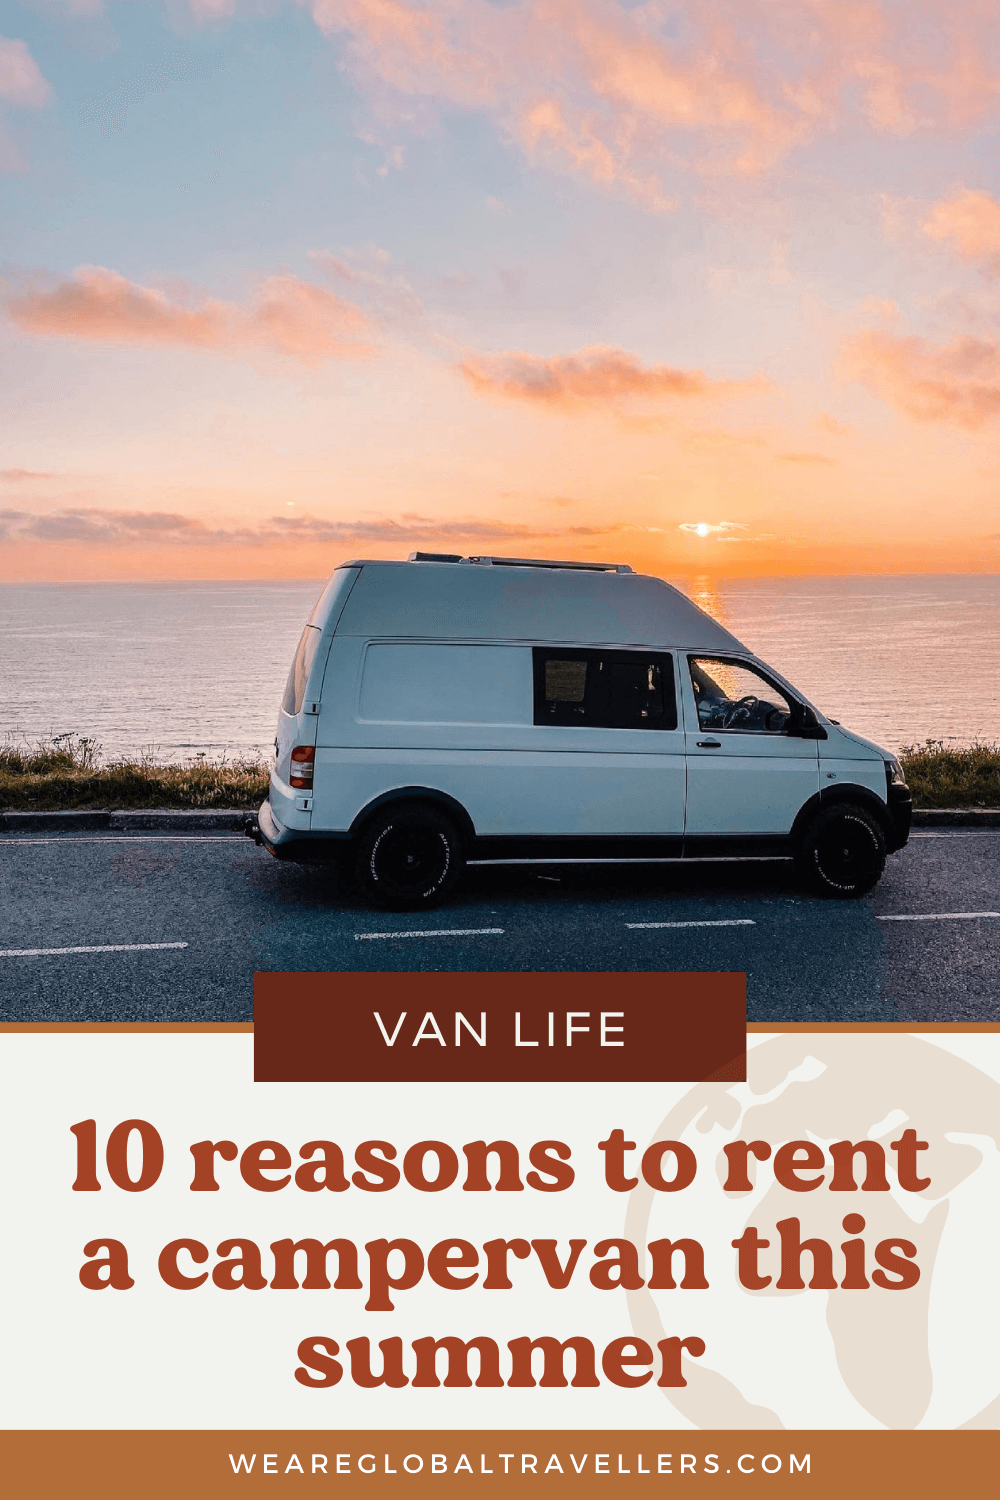 10 reasons to rent a campervan for a road trip this summer